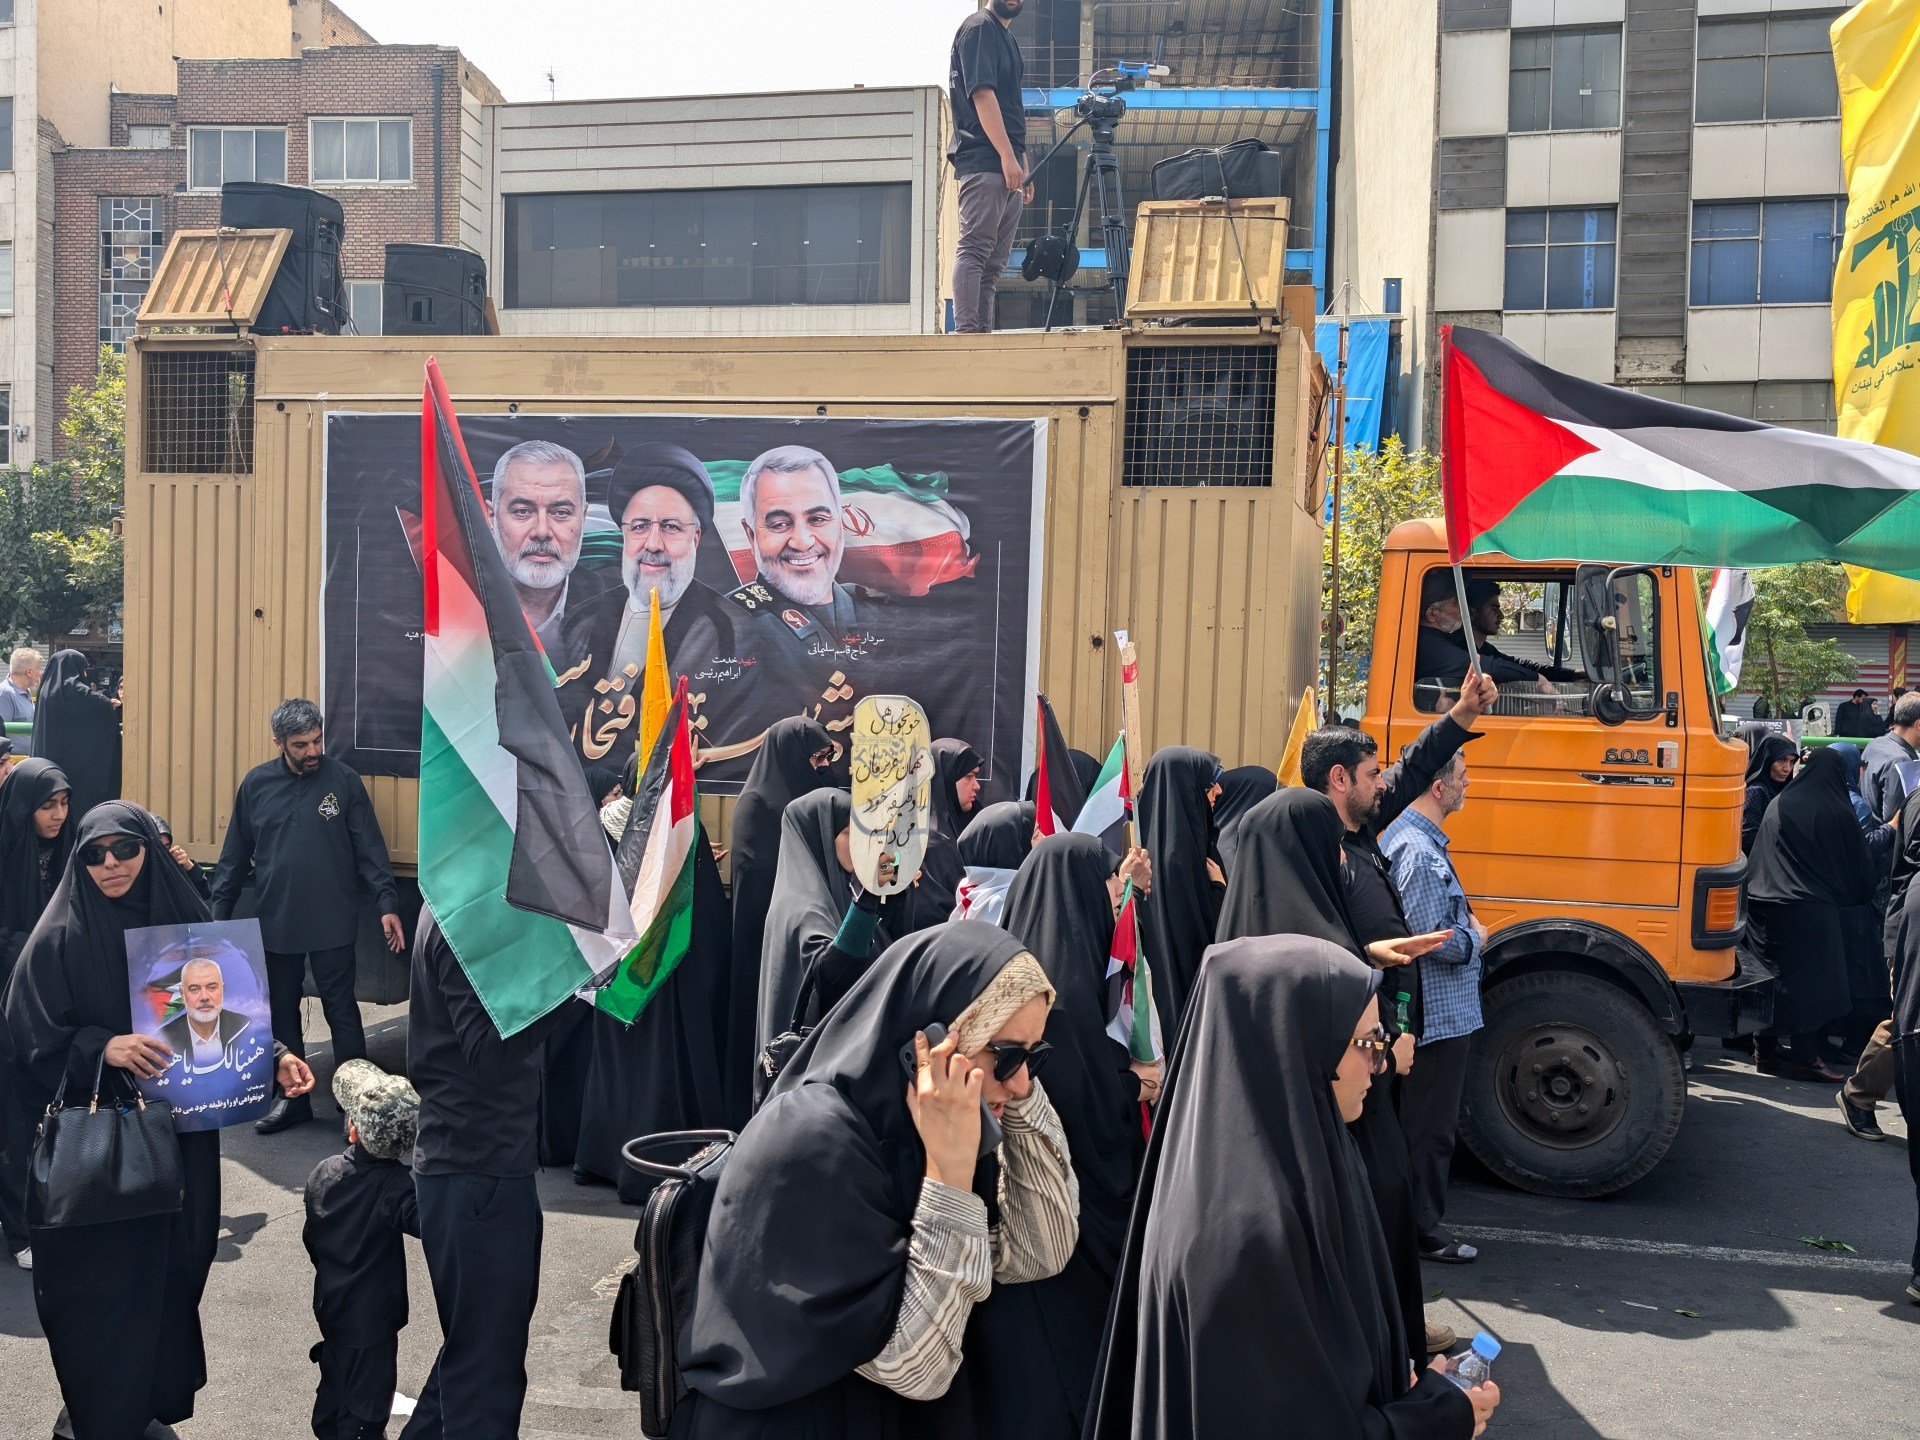 Thousands mourn Hamas leader Haniyeh in Iran amid calls for revenge